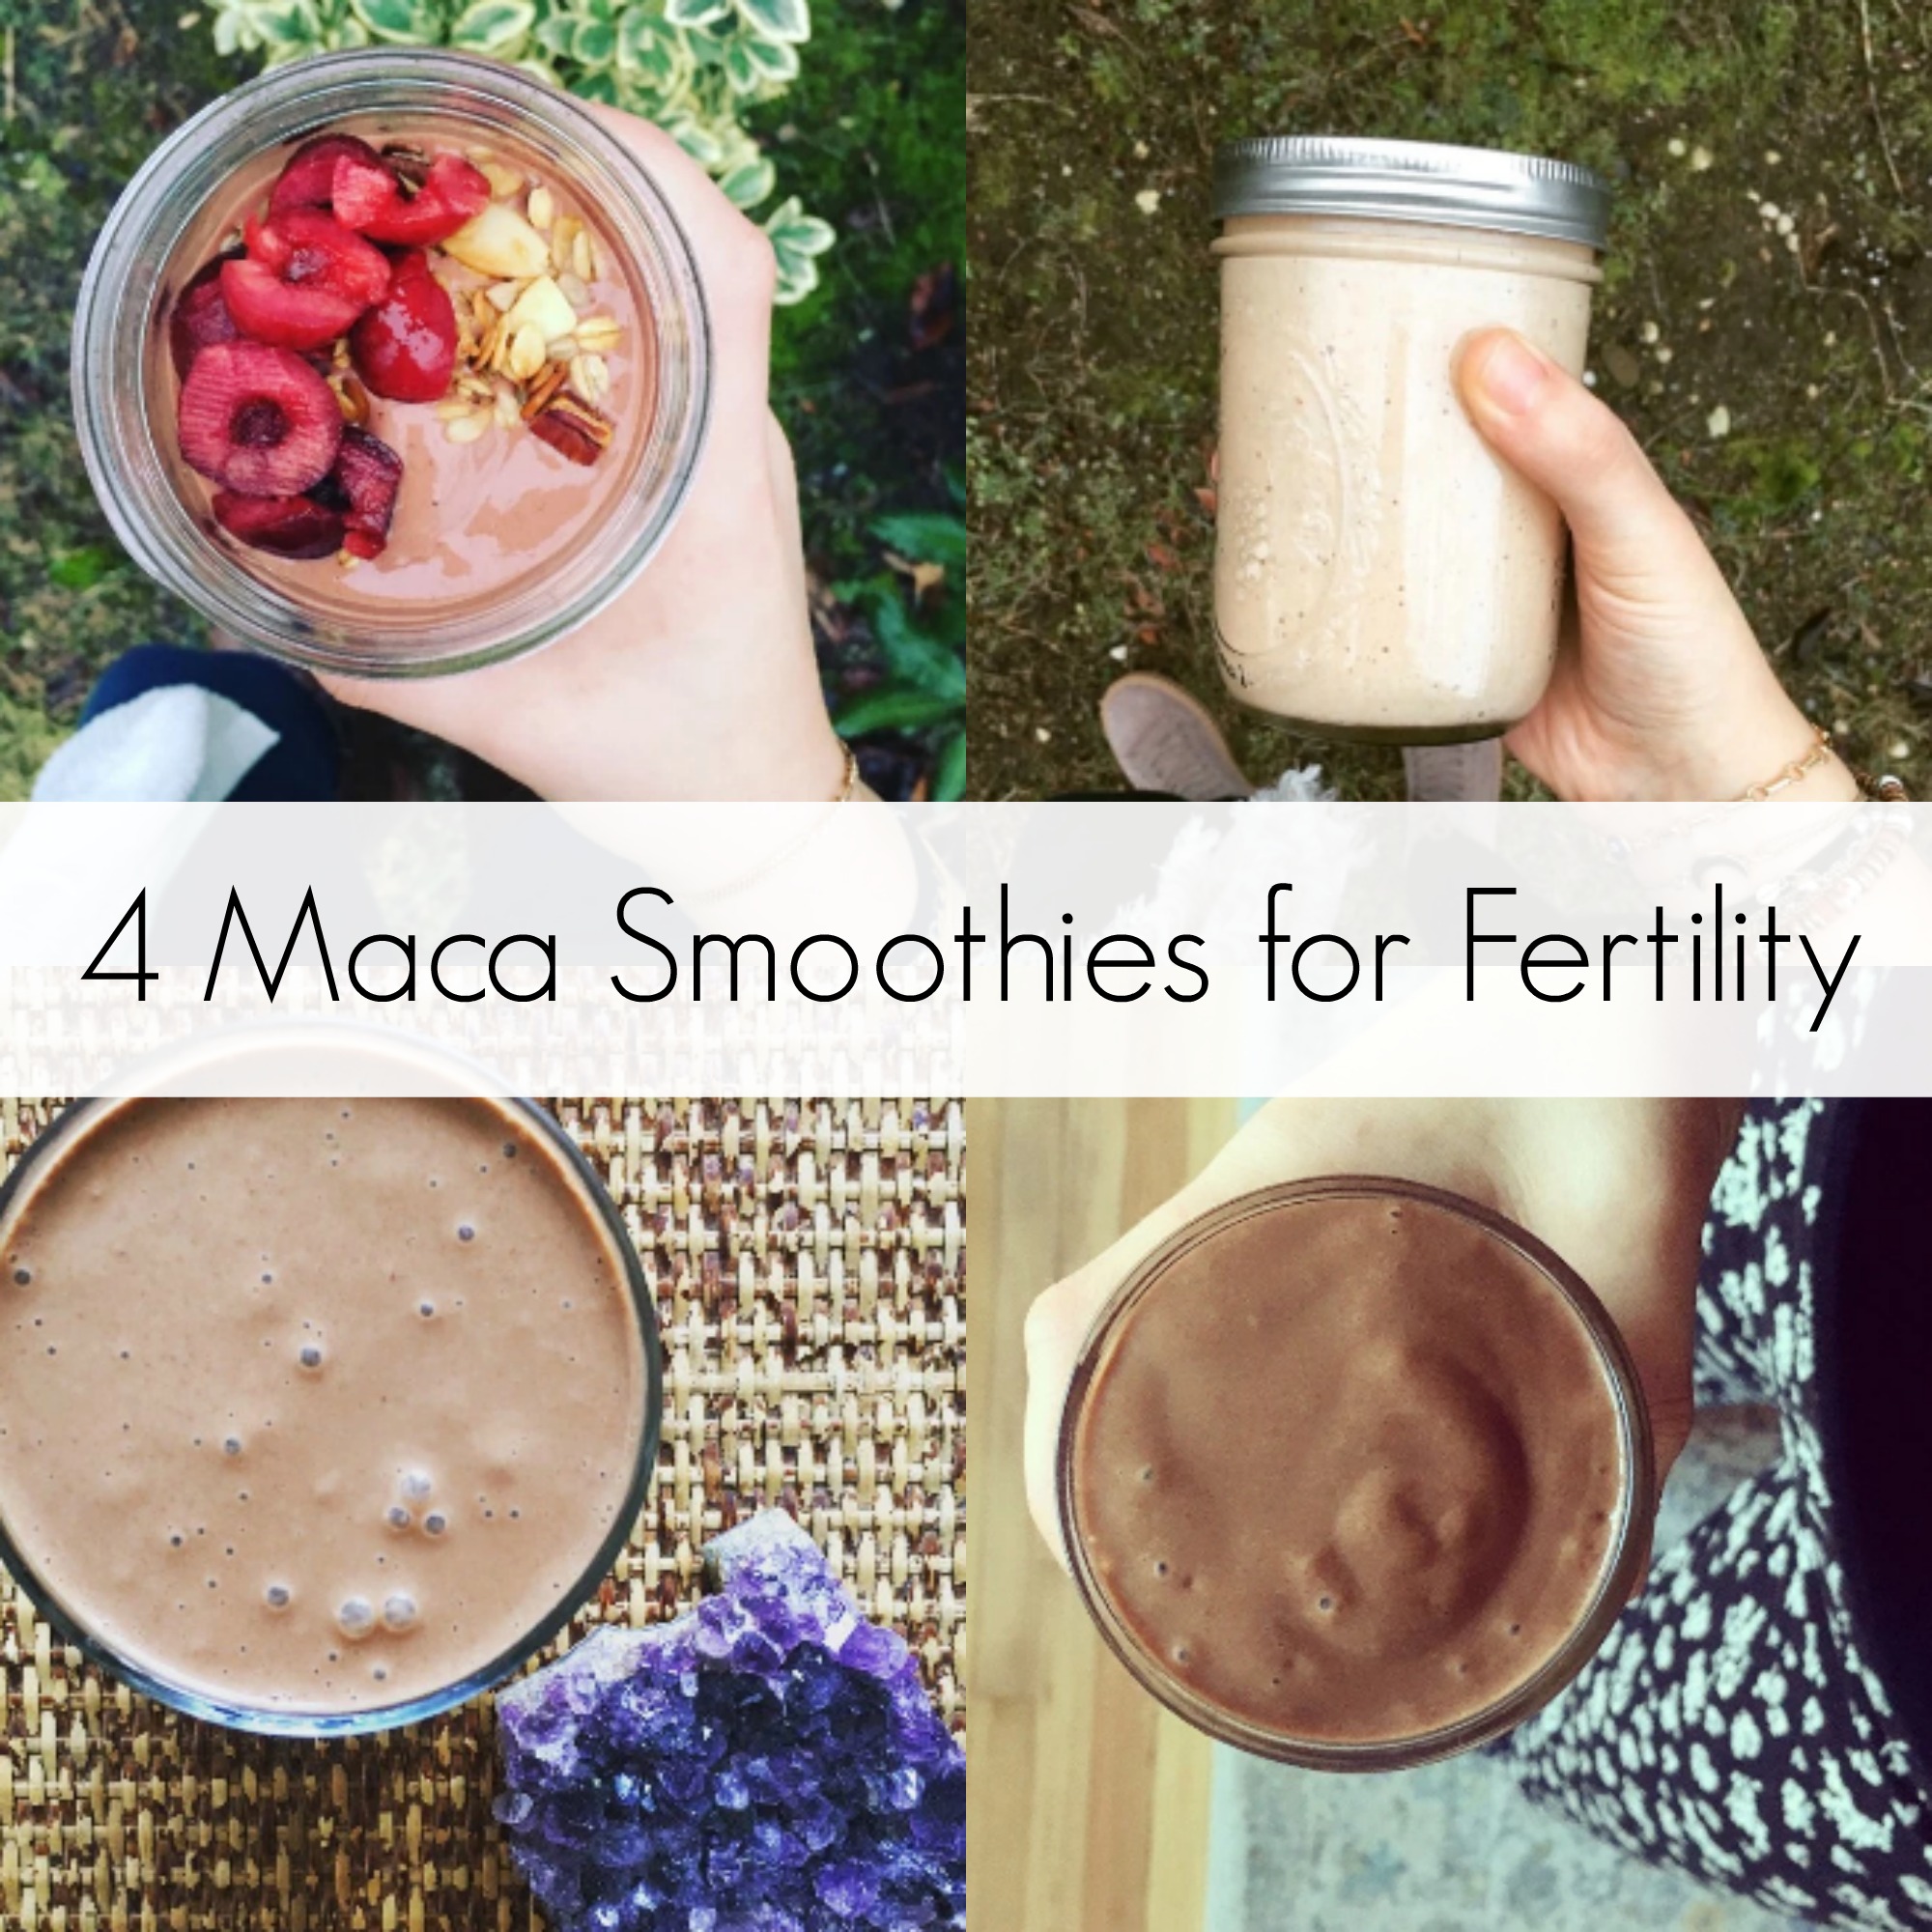 4 Maca Smoothies for Fertility